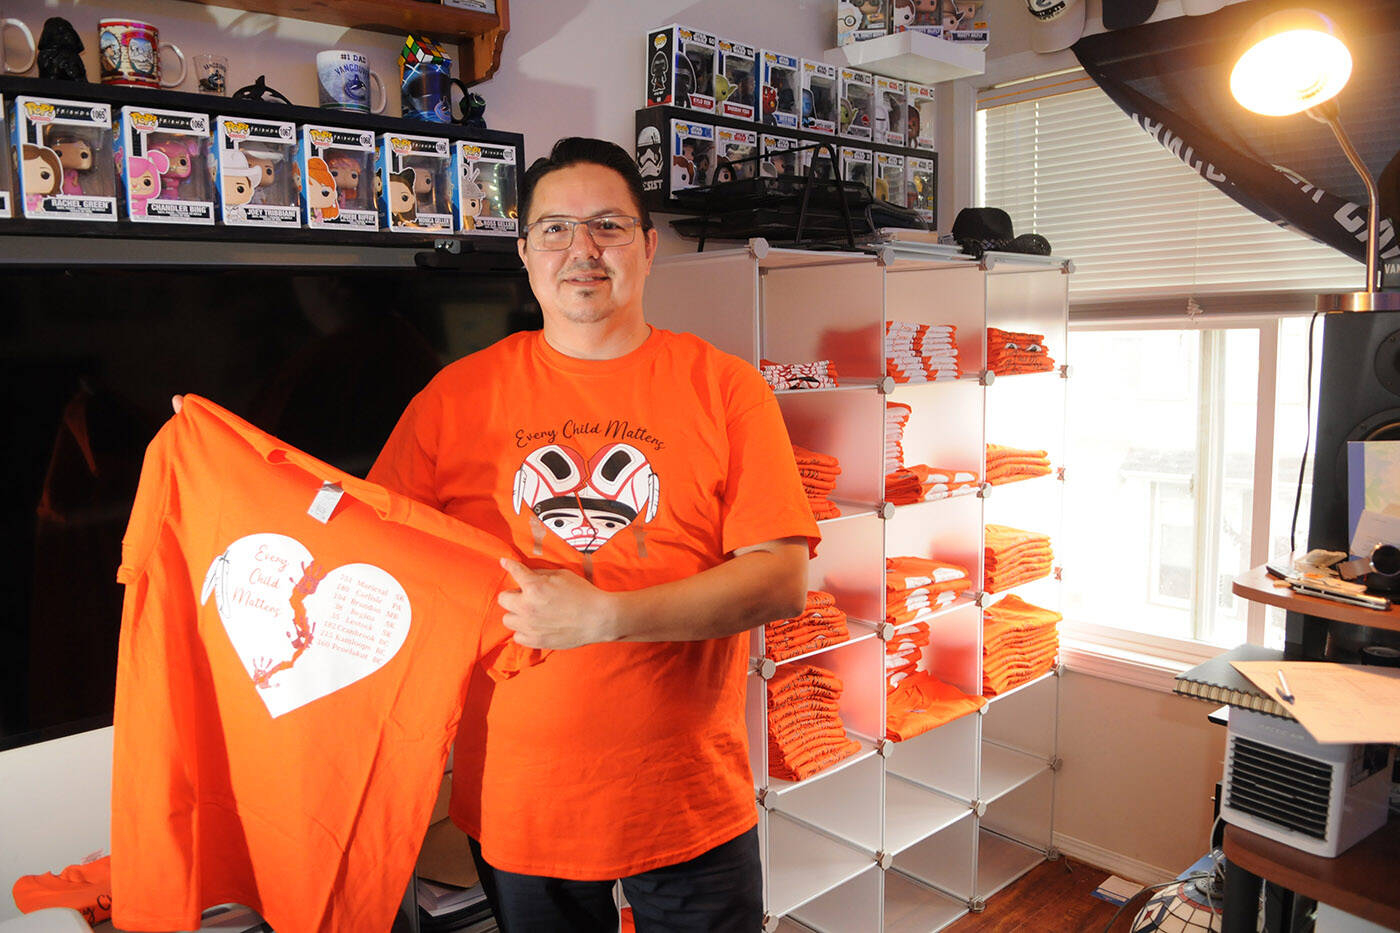 Shawn E. Baginski has been selling orange shirts he designed with all proceeds going to survivors of residential schools. He is pictured here in his Chilliwack home on Sept. 28, 2021. (Jenna Hauck/ Chilliwack Progress)